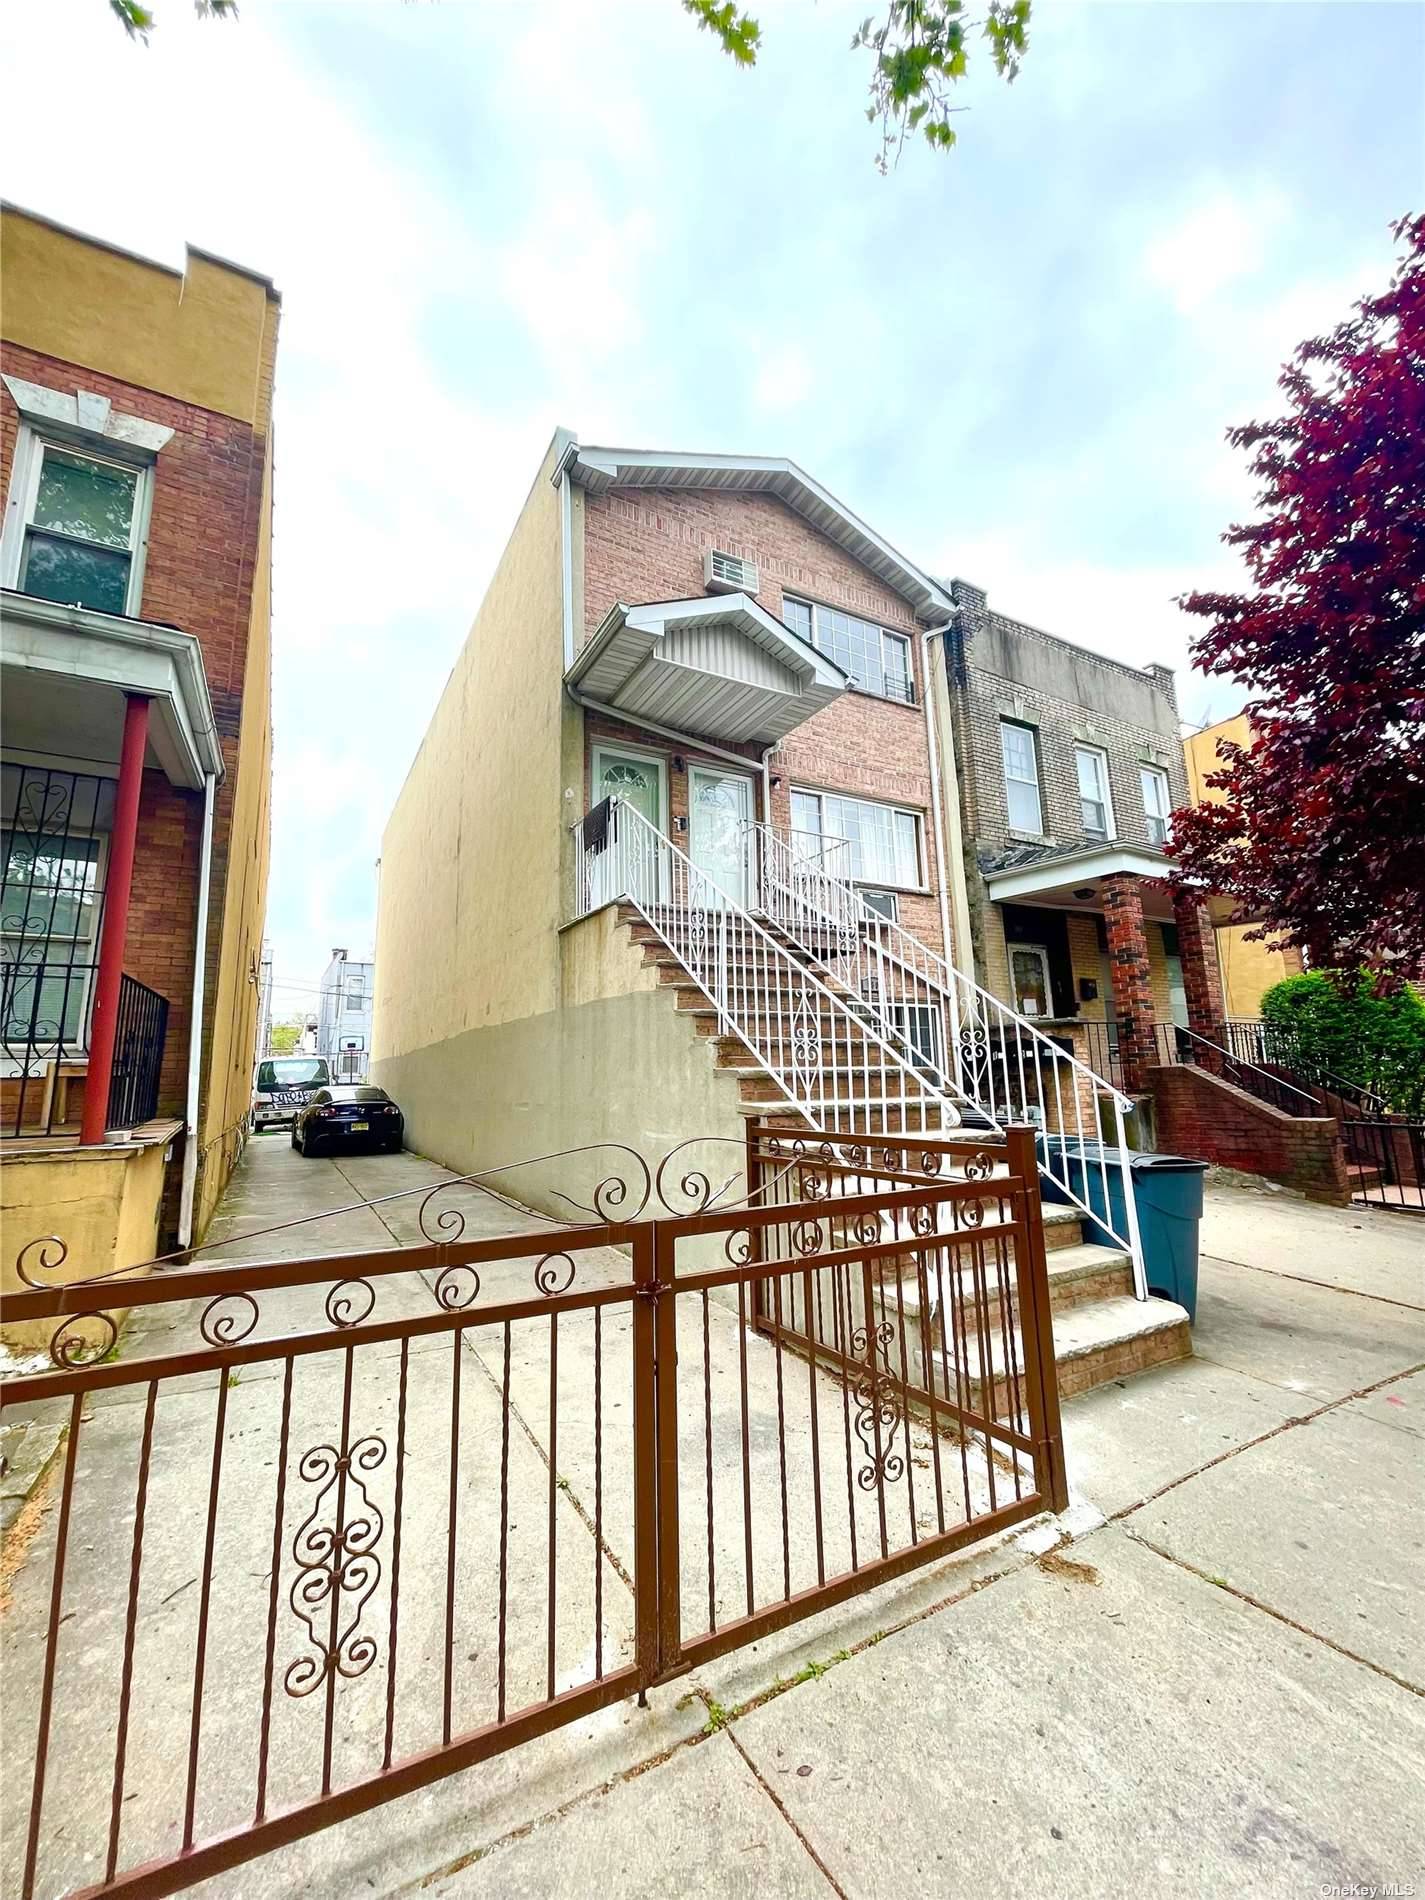 Great investment property in Brownsville crown heights area, 2005 built young detached 3 family house in a good and shape condition, walkable distance to subway 3 train station, B7, B12 ...